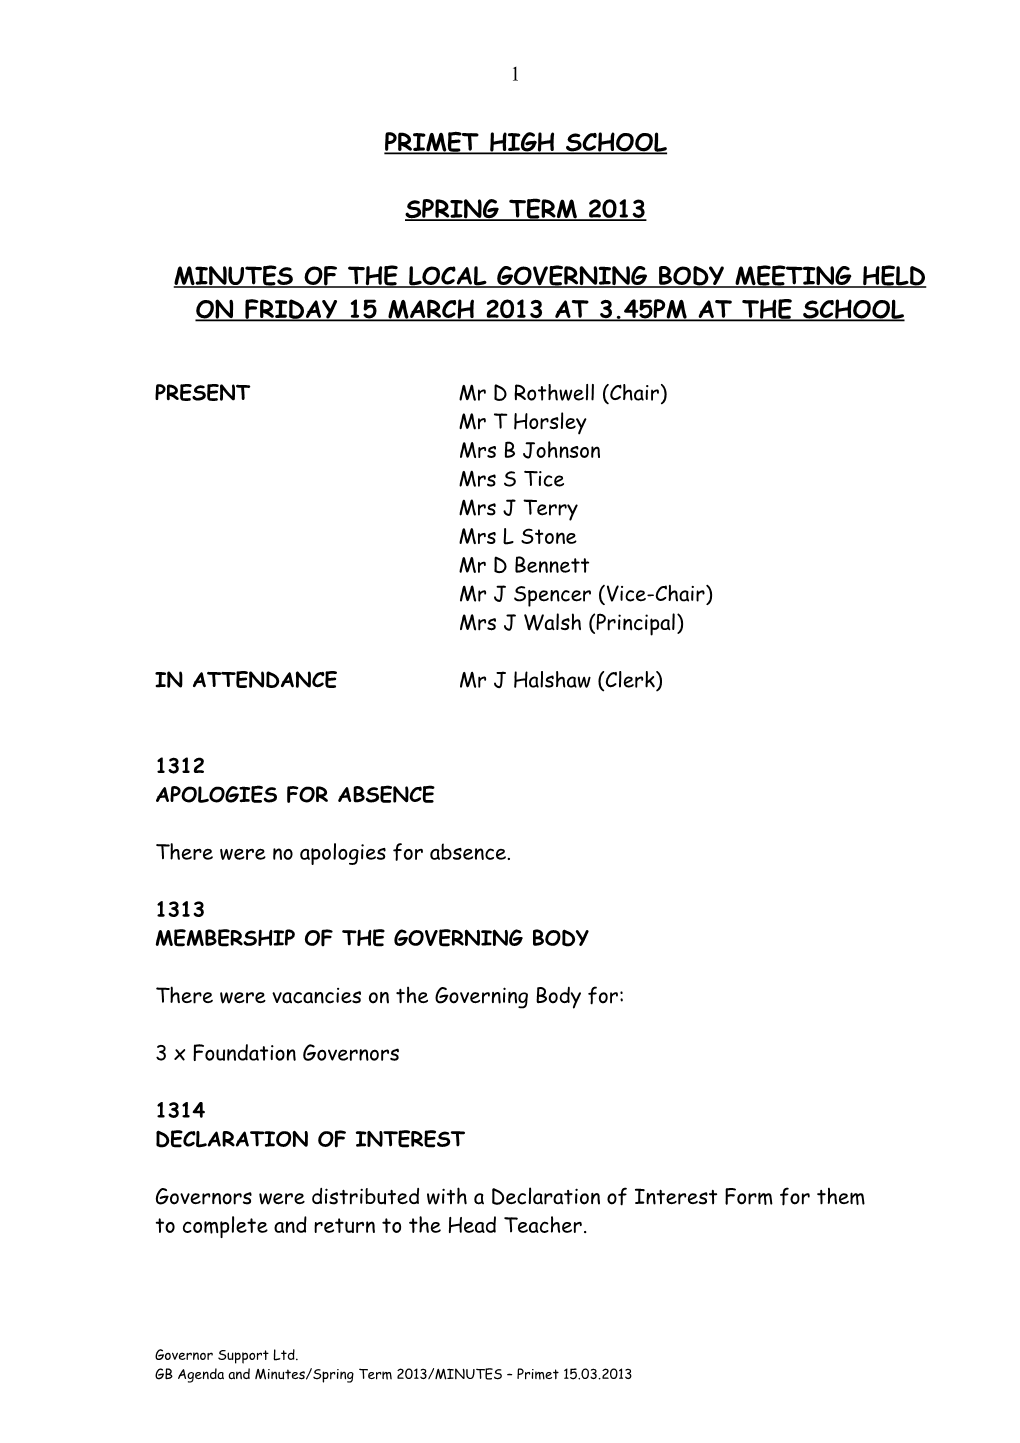 Minutes of the Governing Body Meeting Of